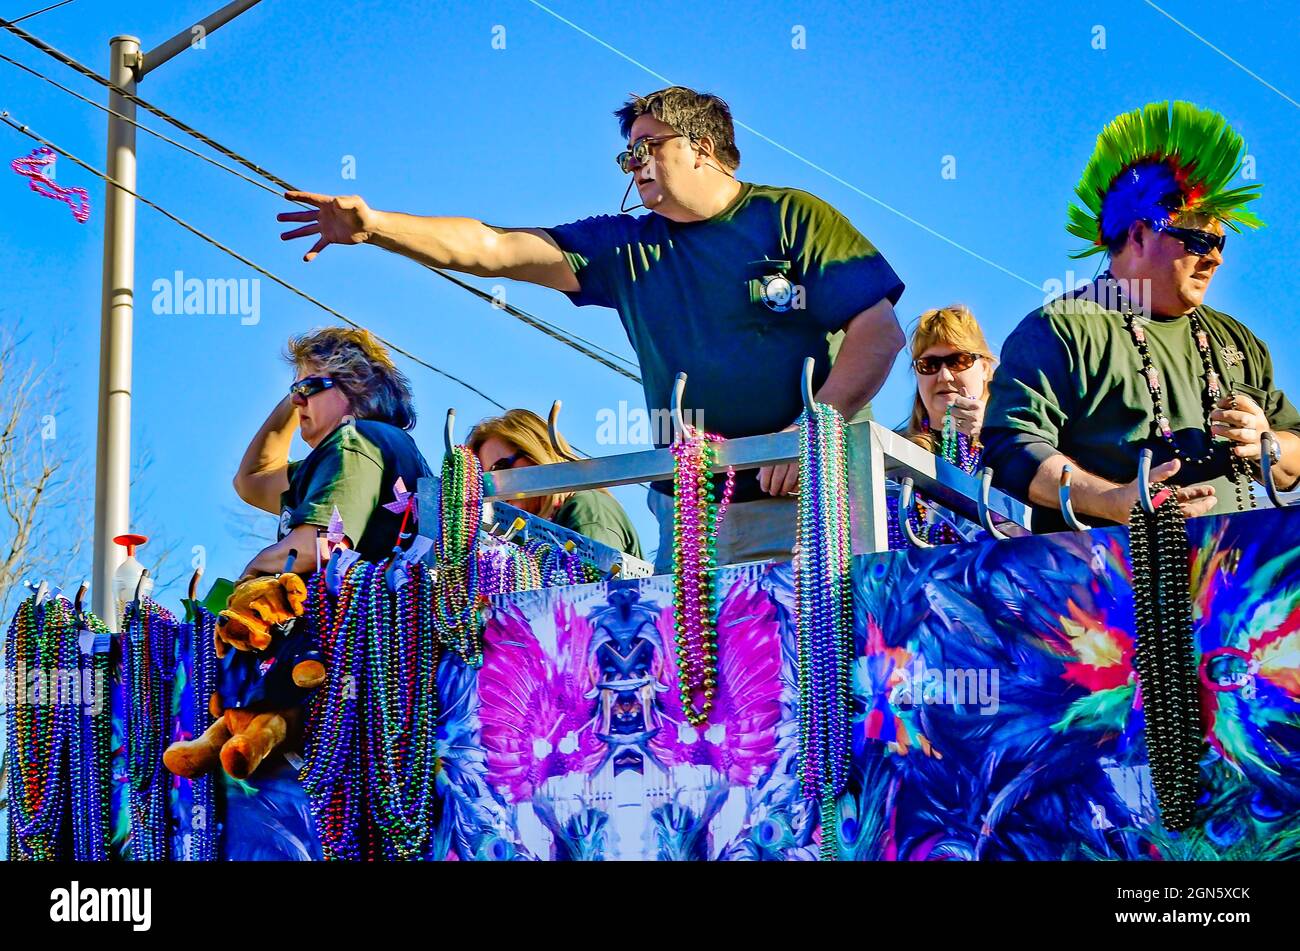 A man throws Mardi Gras beads from a Mardi Gras float during the Joe Cain  Day Mardi Gras parade, Feb. 7, 2016, in Mobile, Alabama Stock Photo - Alamy